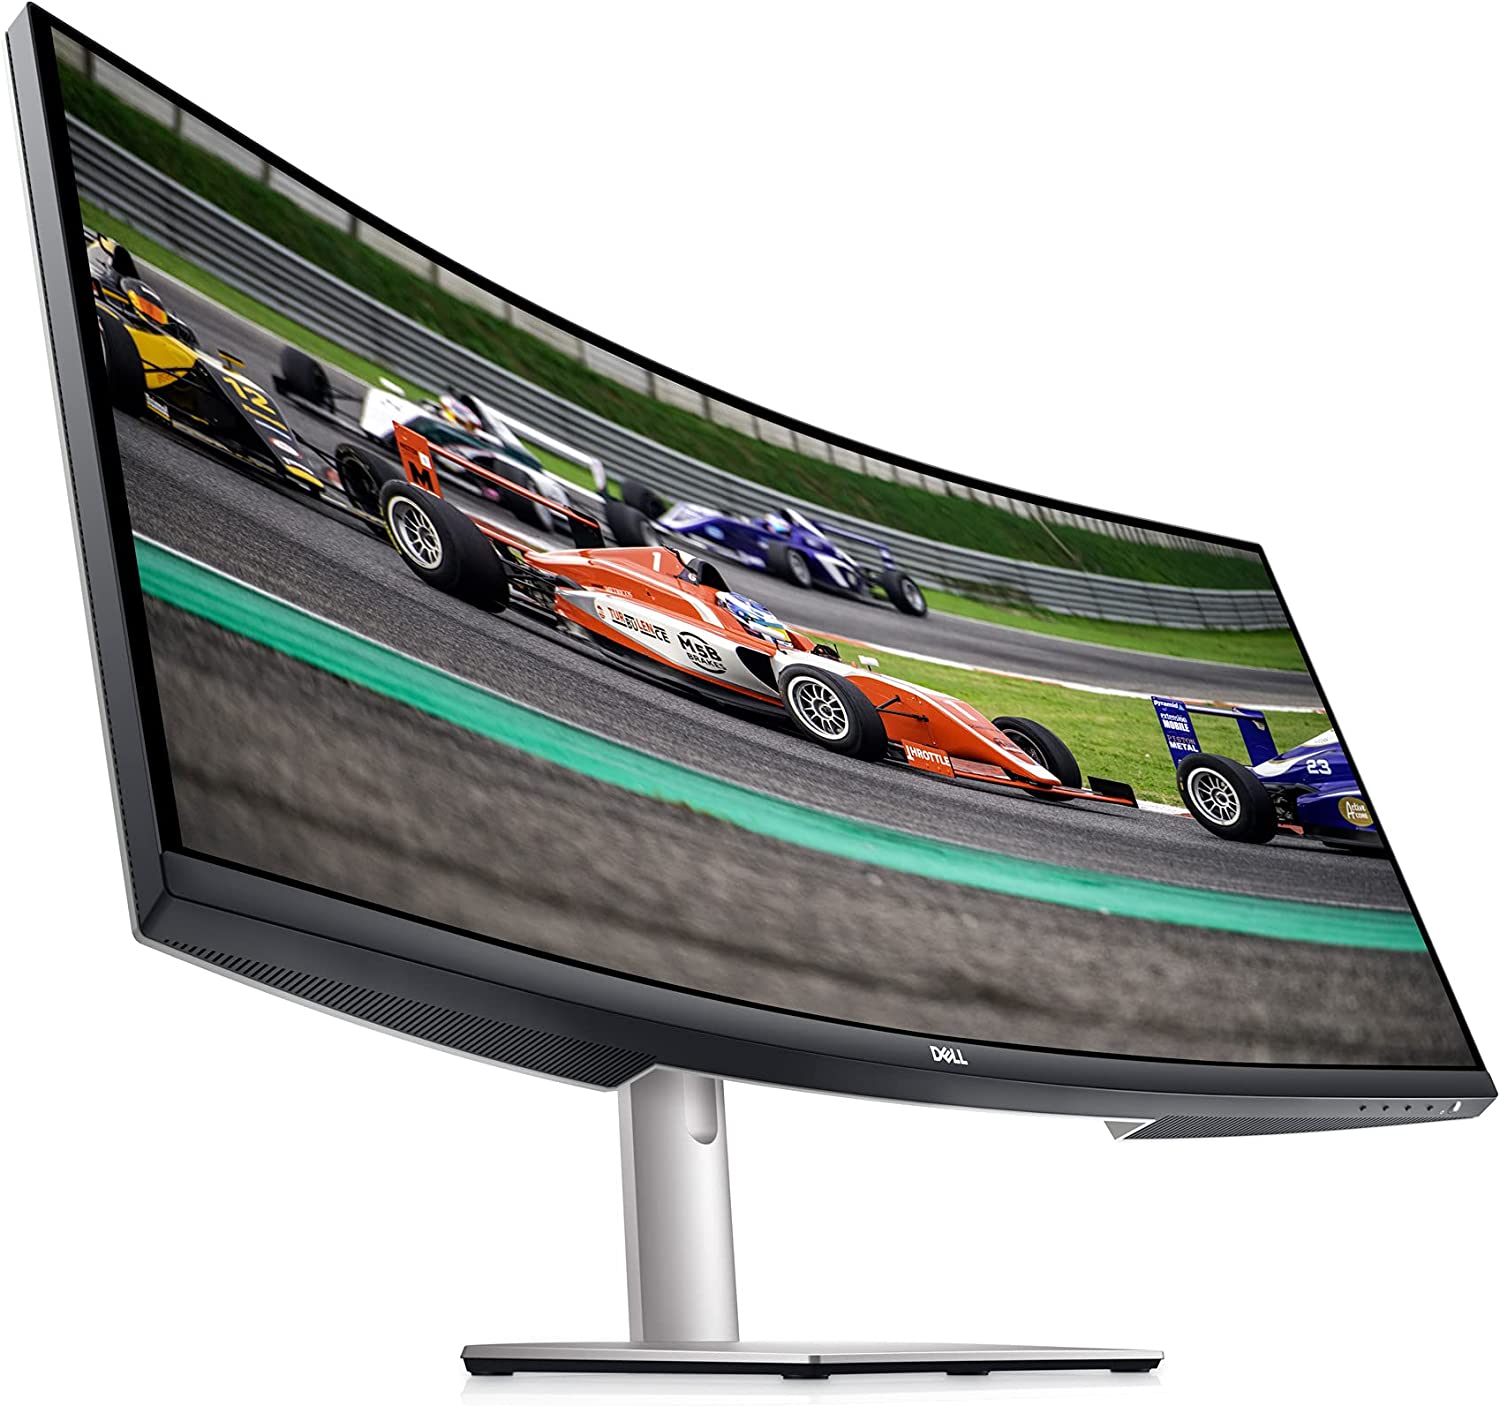 Dell S3422DW - 34-inch WQHD 21:9 Curved Monitor, 3440 x 1440 at 100Hz, 1800R, Built-in Dual 5W Speakers, 4ms Grey-to-Grey Response Time (Extreme Mode), 16.7 Millions.